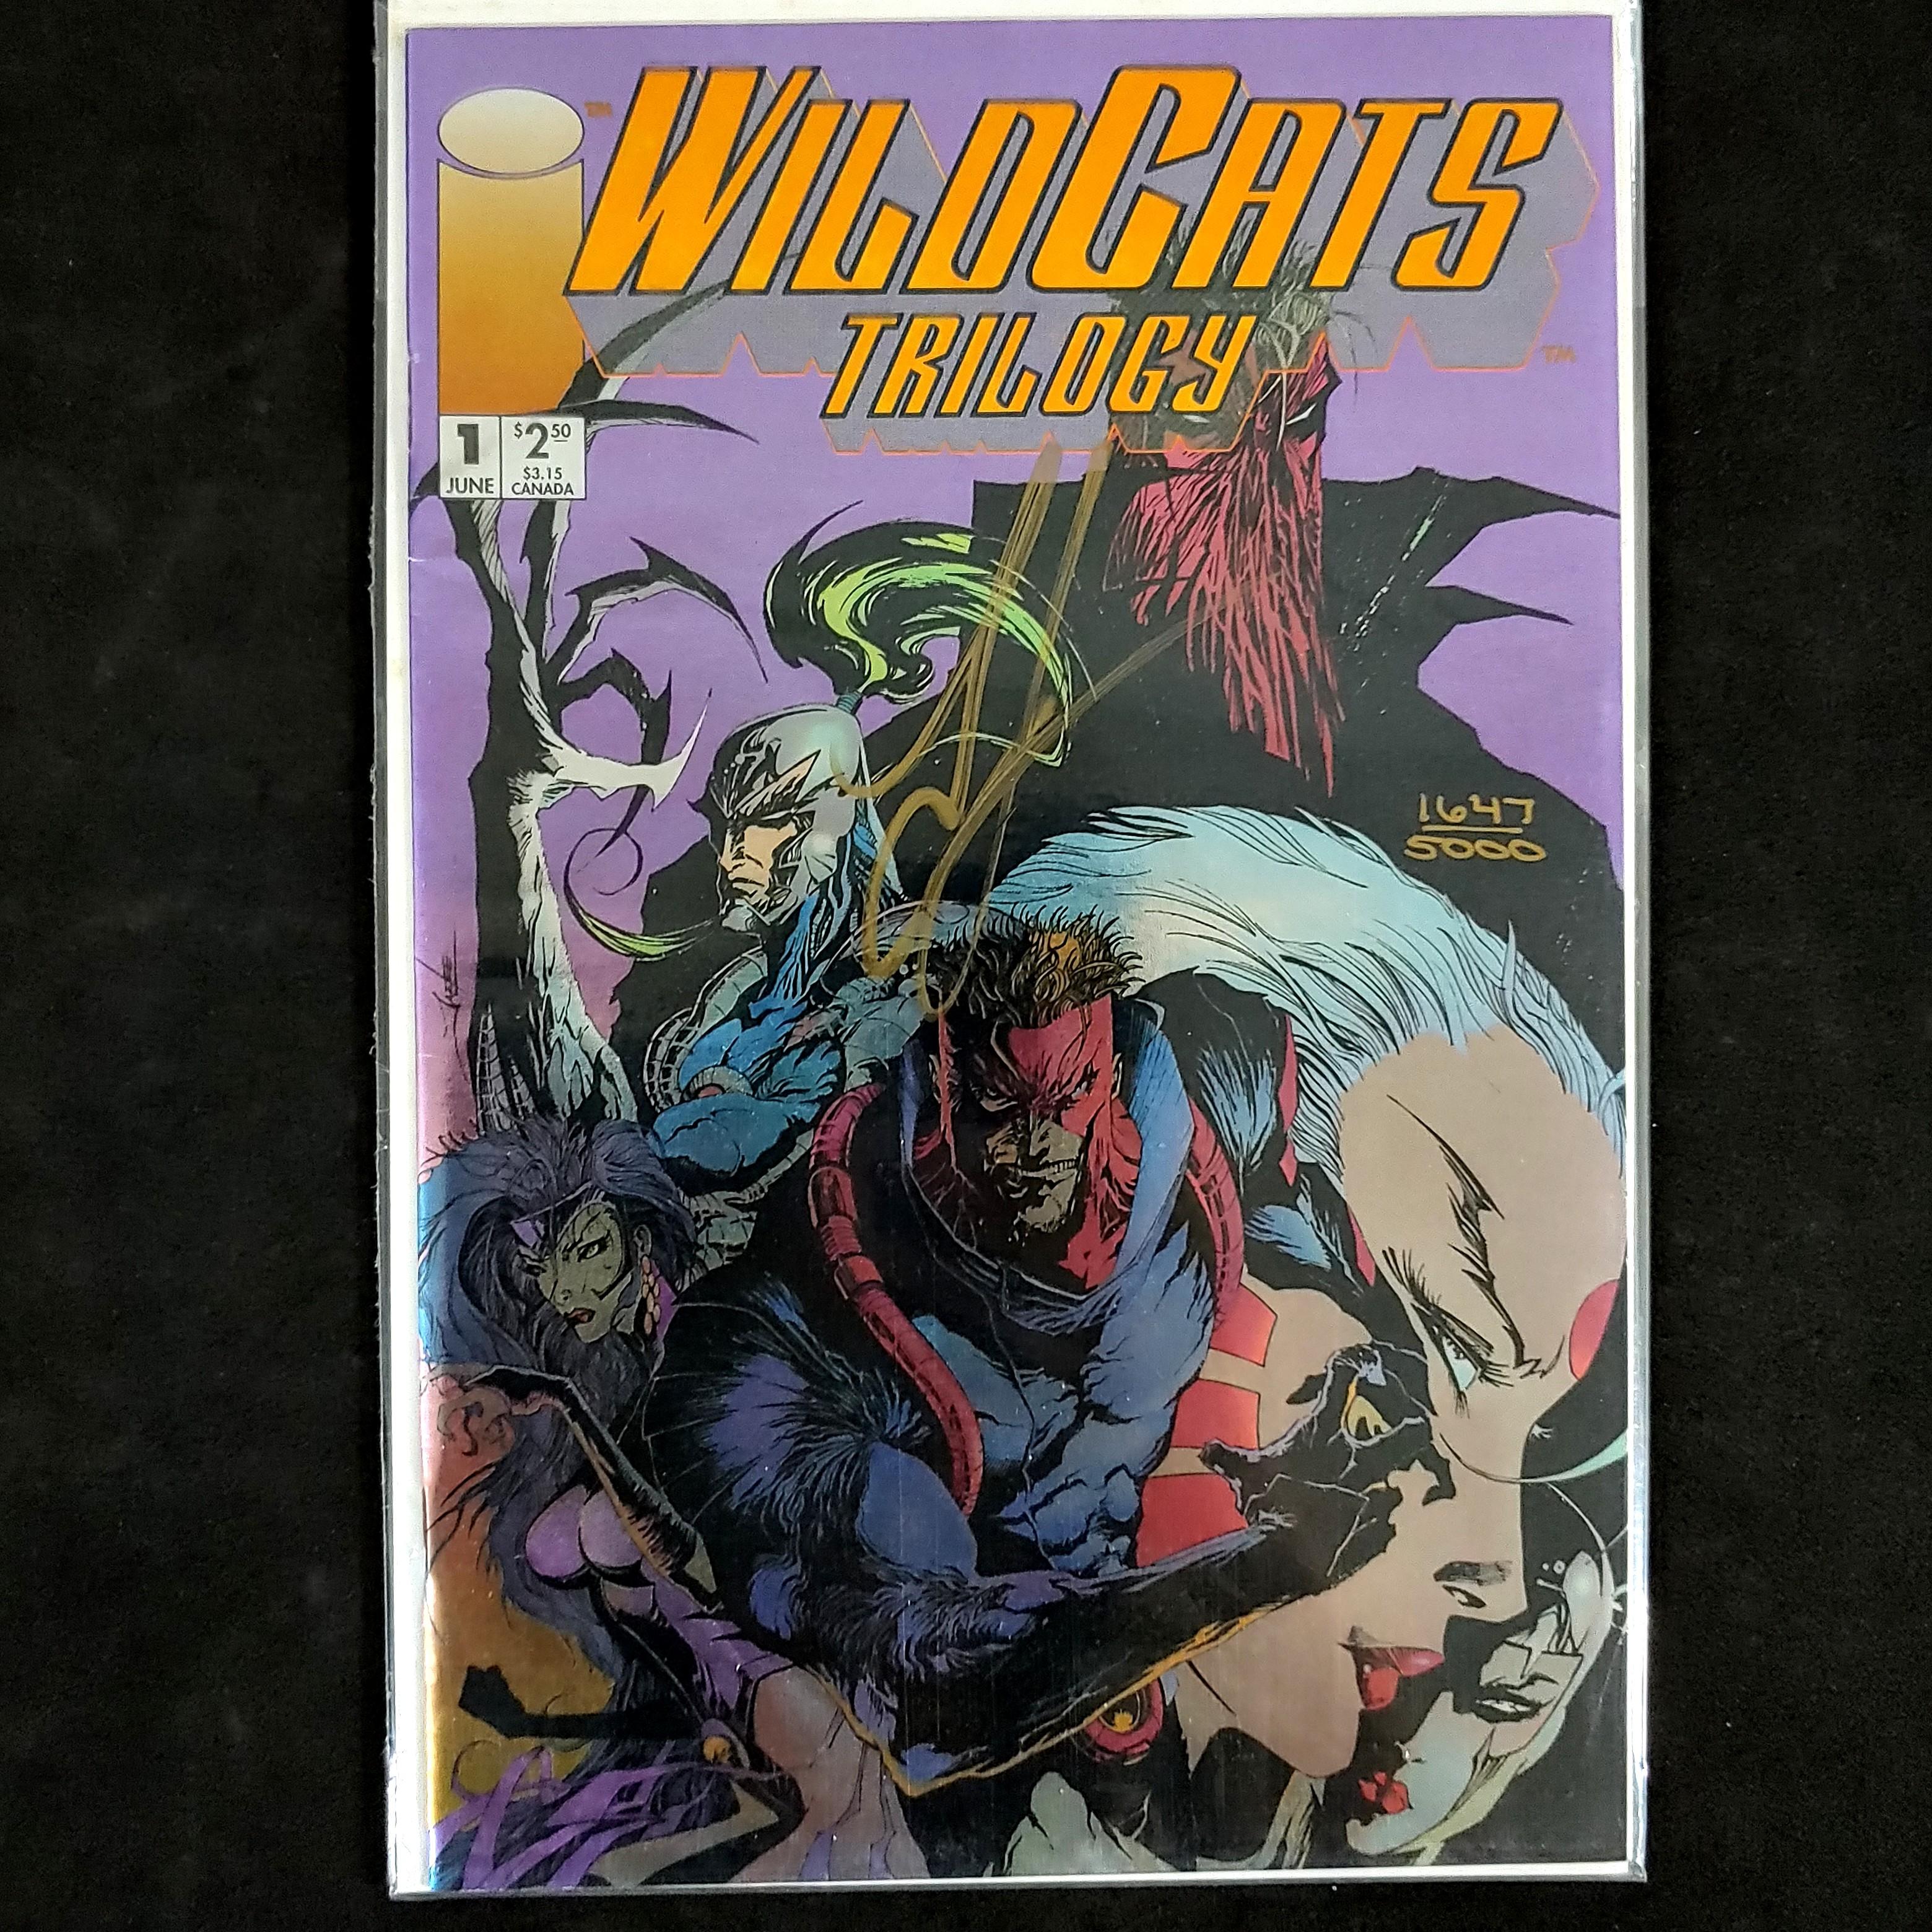 Wildcats Trilogy 1 3 Complete Set 1993 Signed By Jae Lee 1647 5000 Image Comics 書本 文具 漫畫 Carousell